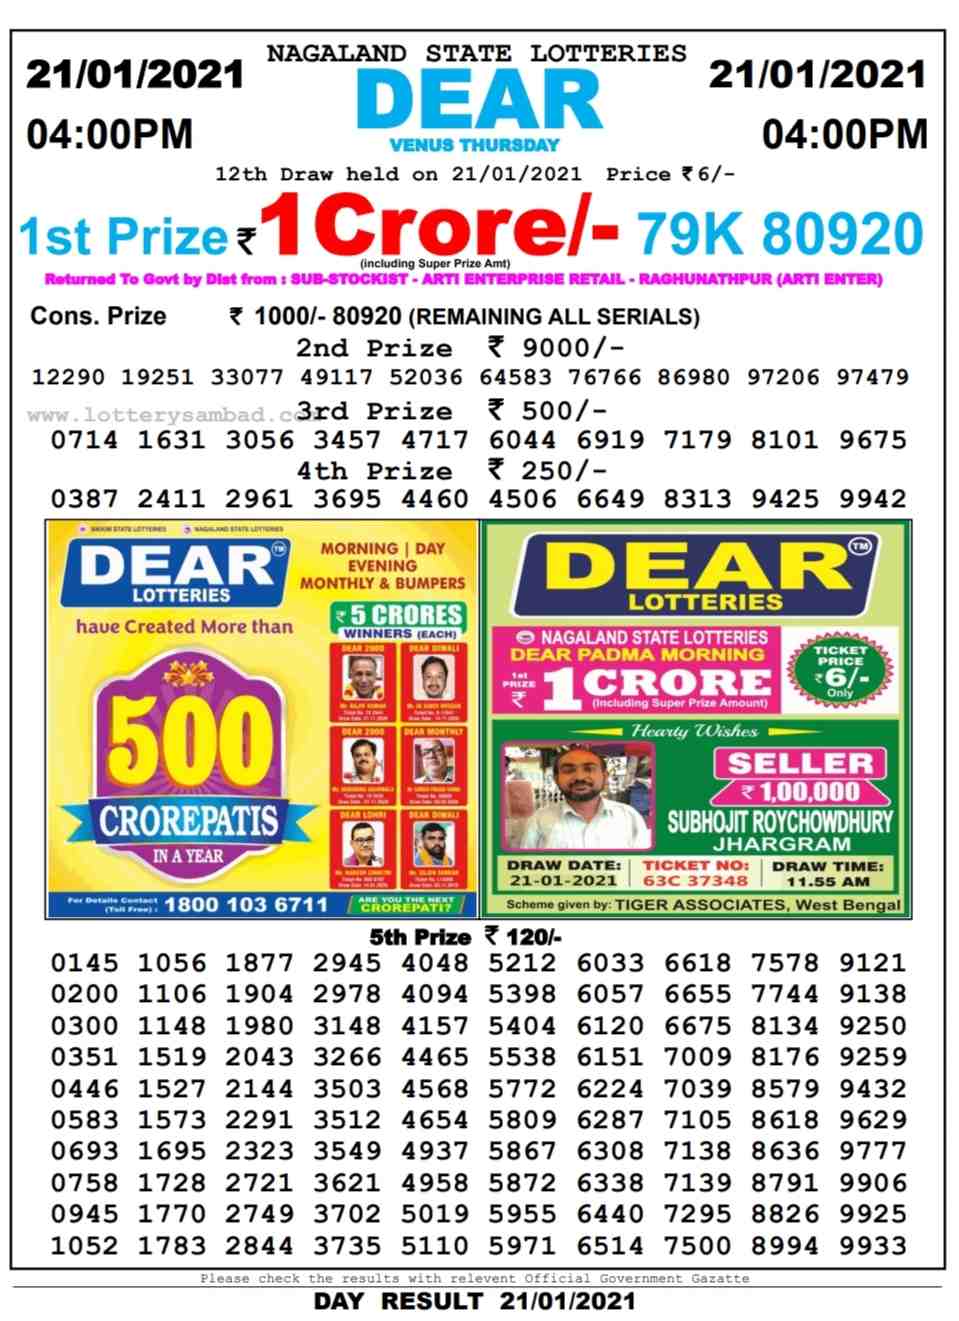 Nagaland Lottery 4 PM result on 21.1.2021